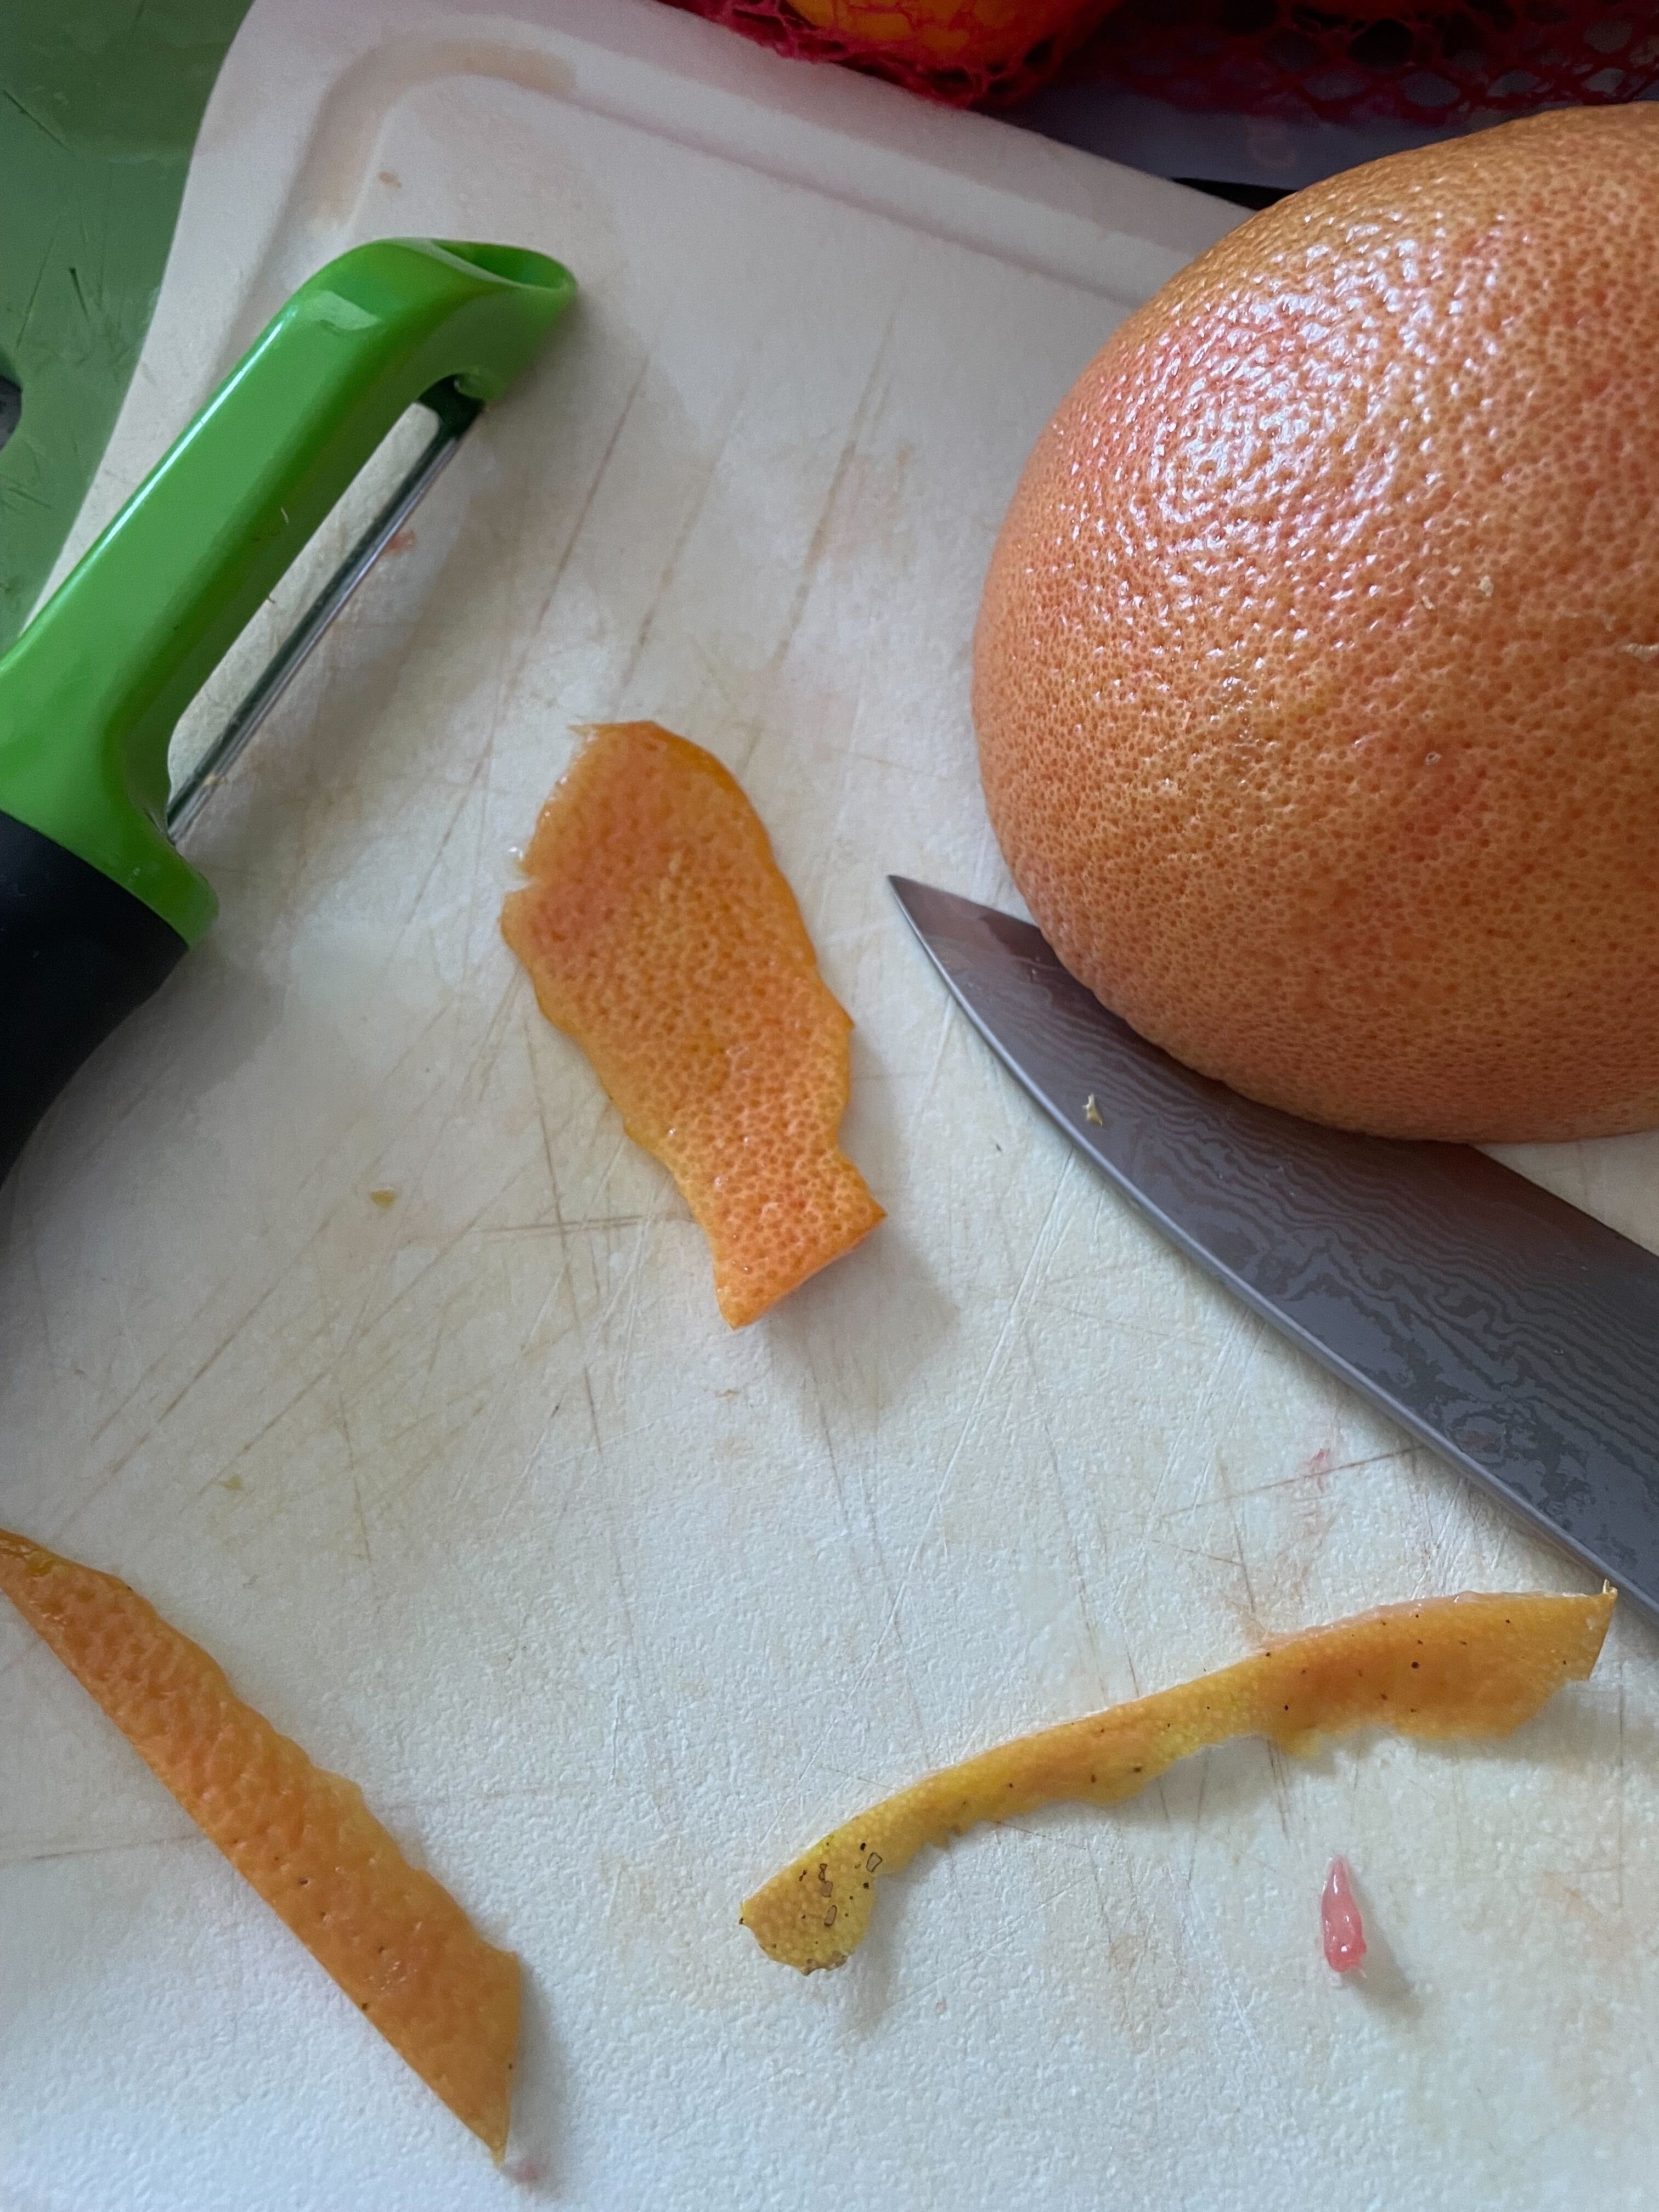 cutting board with grapefruit peels, knife, and vegetable peeler